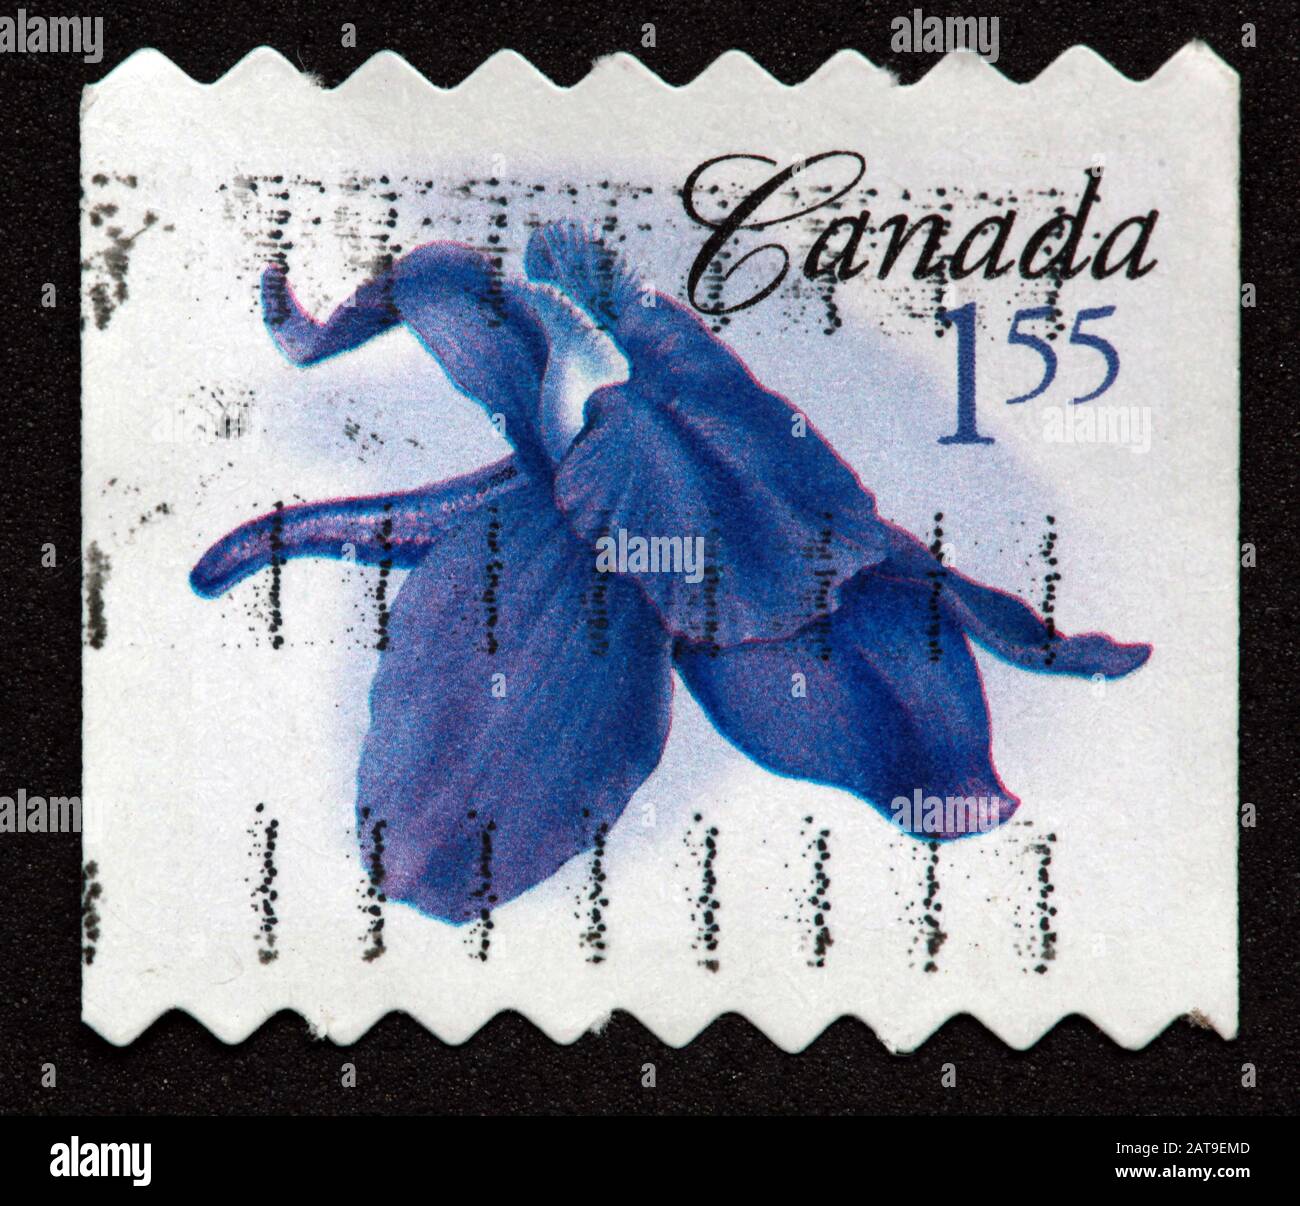 Canadian Stamp, Canada Stamp, Canada Post, Usato Stamp, Little Larkspur, Blue Flower, Canada 1,55, Usd 1,55 Foto Stock